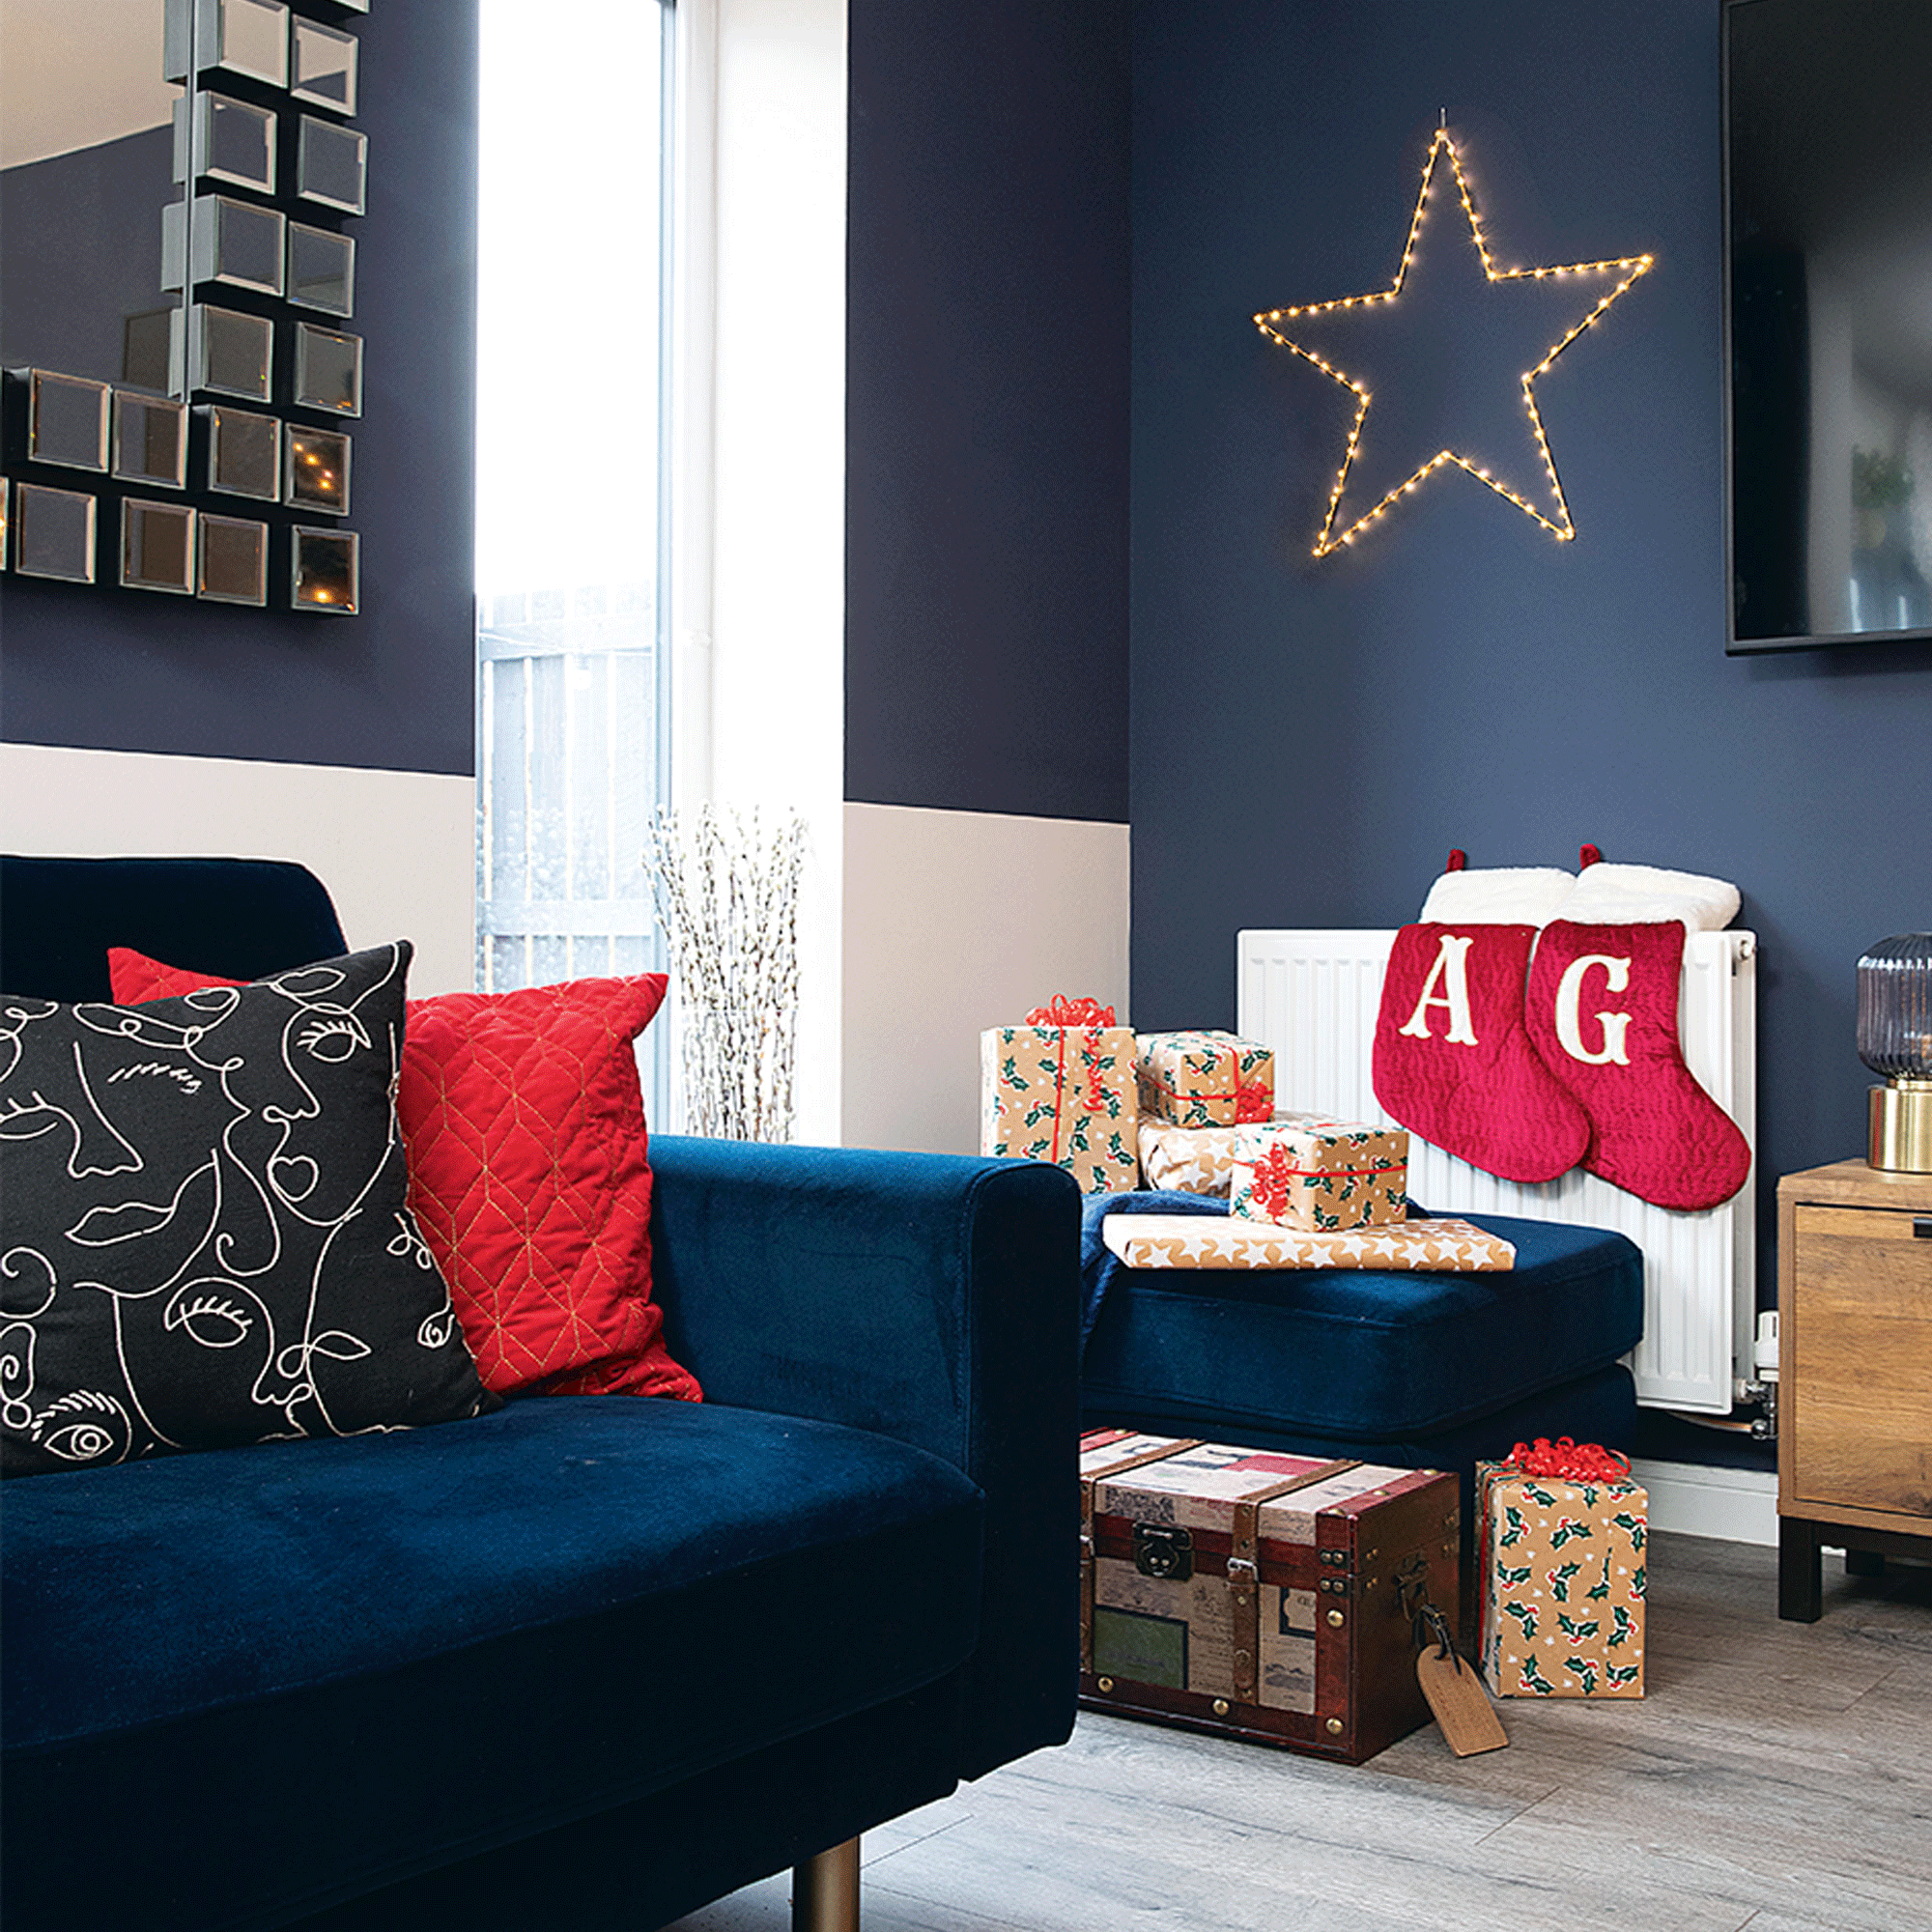 Navy blue living room with red stockings